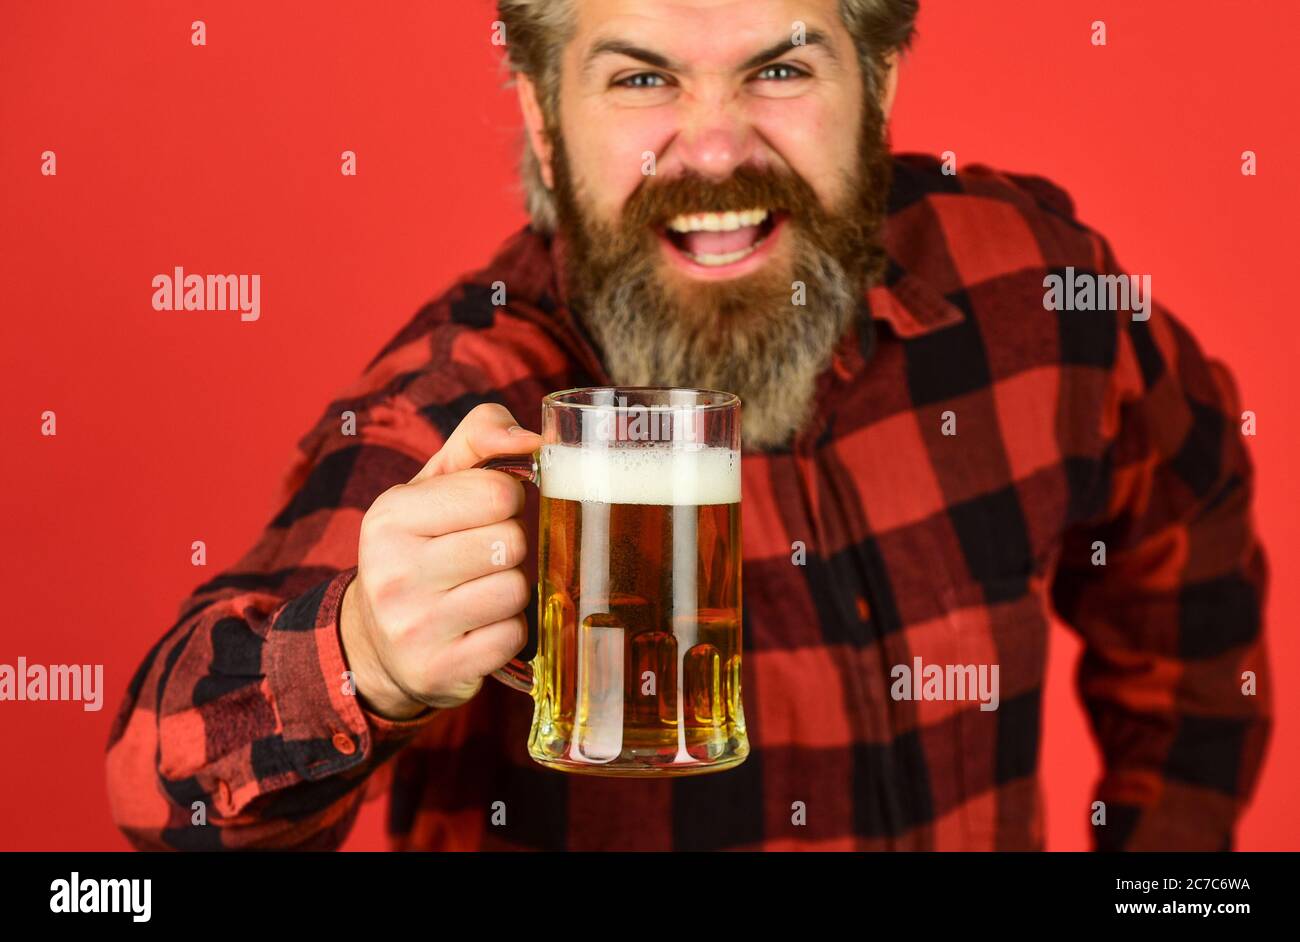 enjoying a beer. confident bartender. barman in bar. resting at pub. Cheers. sport bar. trying a new beer. brutal hipster drink beer. mature bearded man hold beer glass. mug of alcohol beverage. Stock Photo